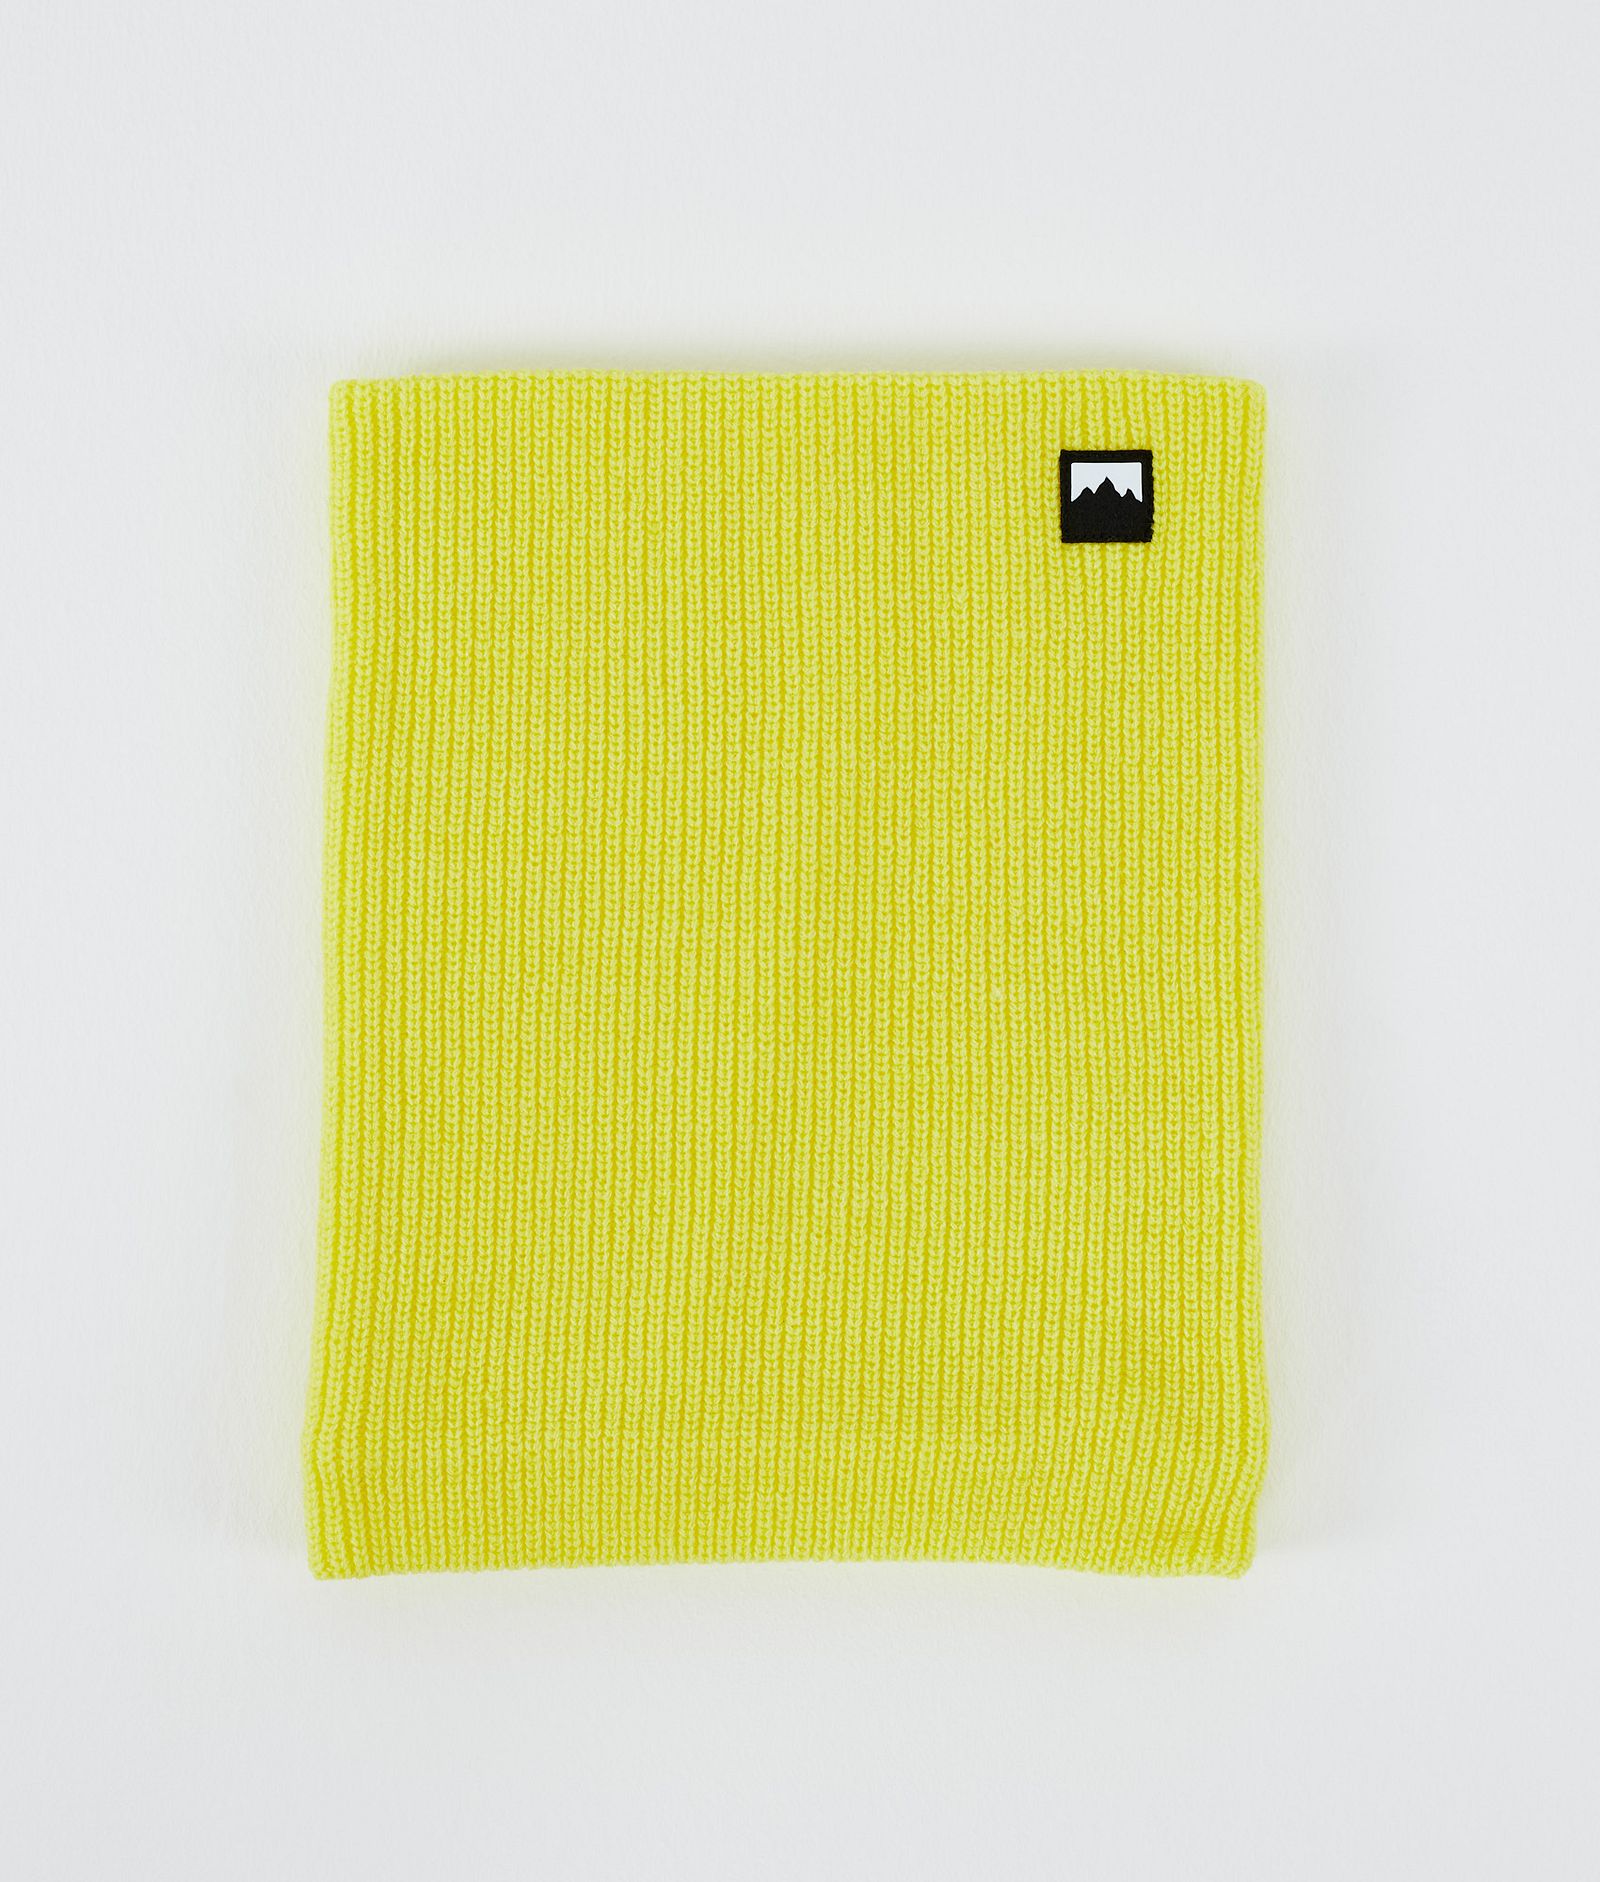 Montec Classic Knitted 2022 Skimasker Bright Yellow